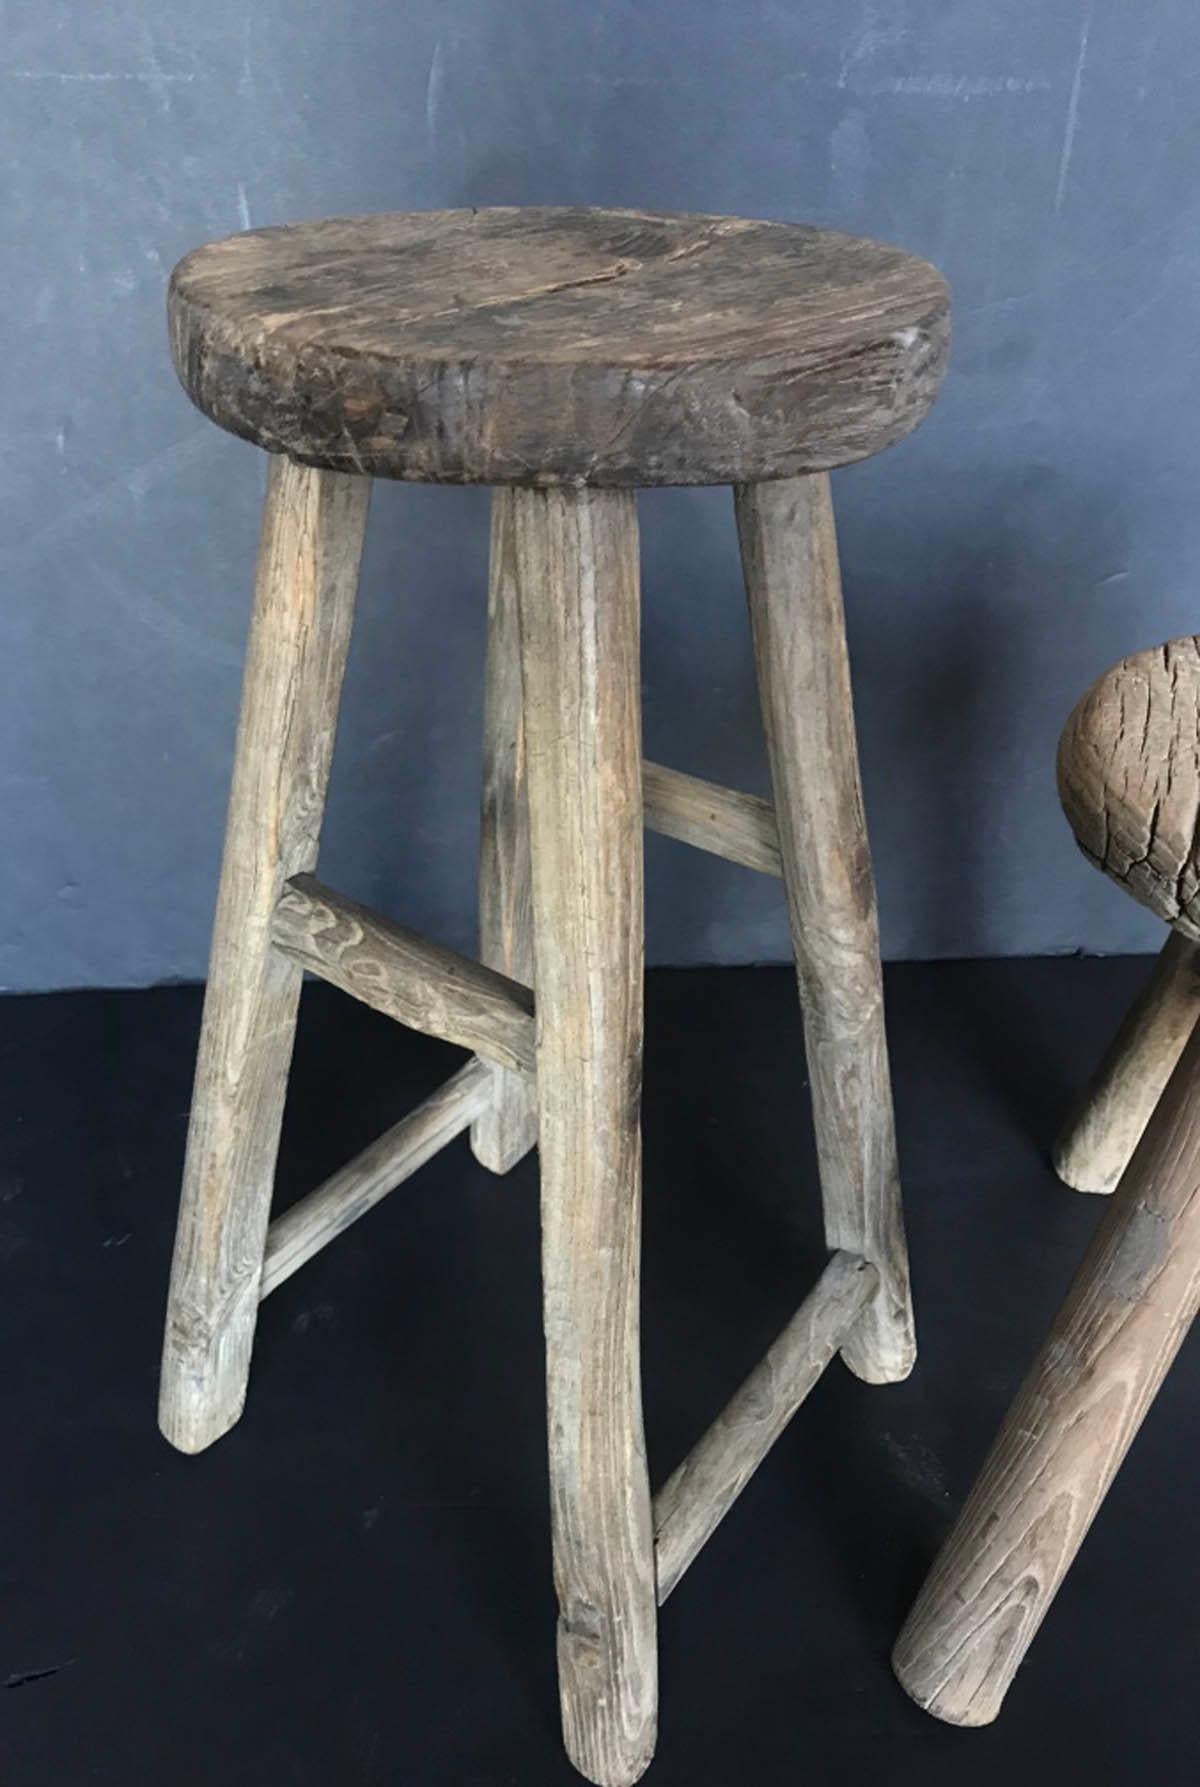 Rustic 19th century Elm stool from China with different stretcher configuration. These are sold separately. The left measures 9 inches diameter on the seat. The footprint is 10.5 by 11 inches and the overall height is 20.75 inches. Structurally